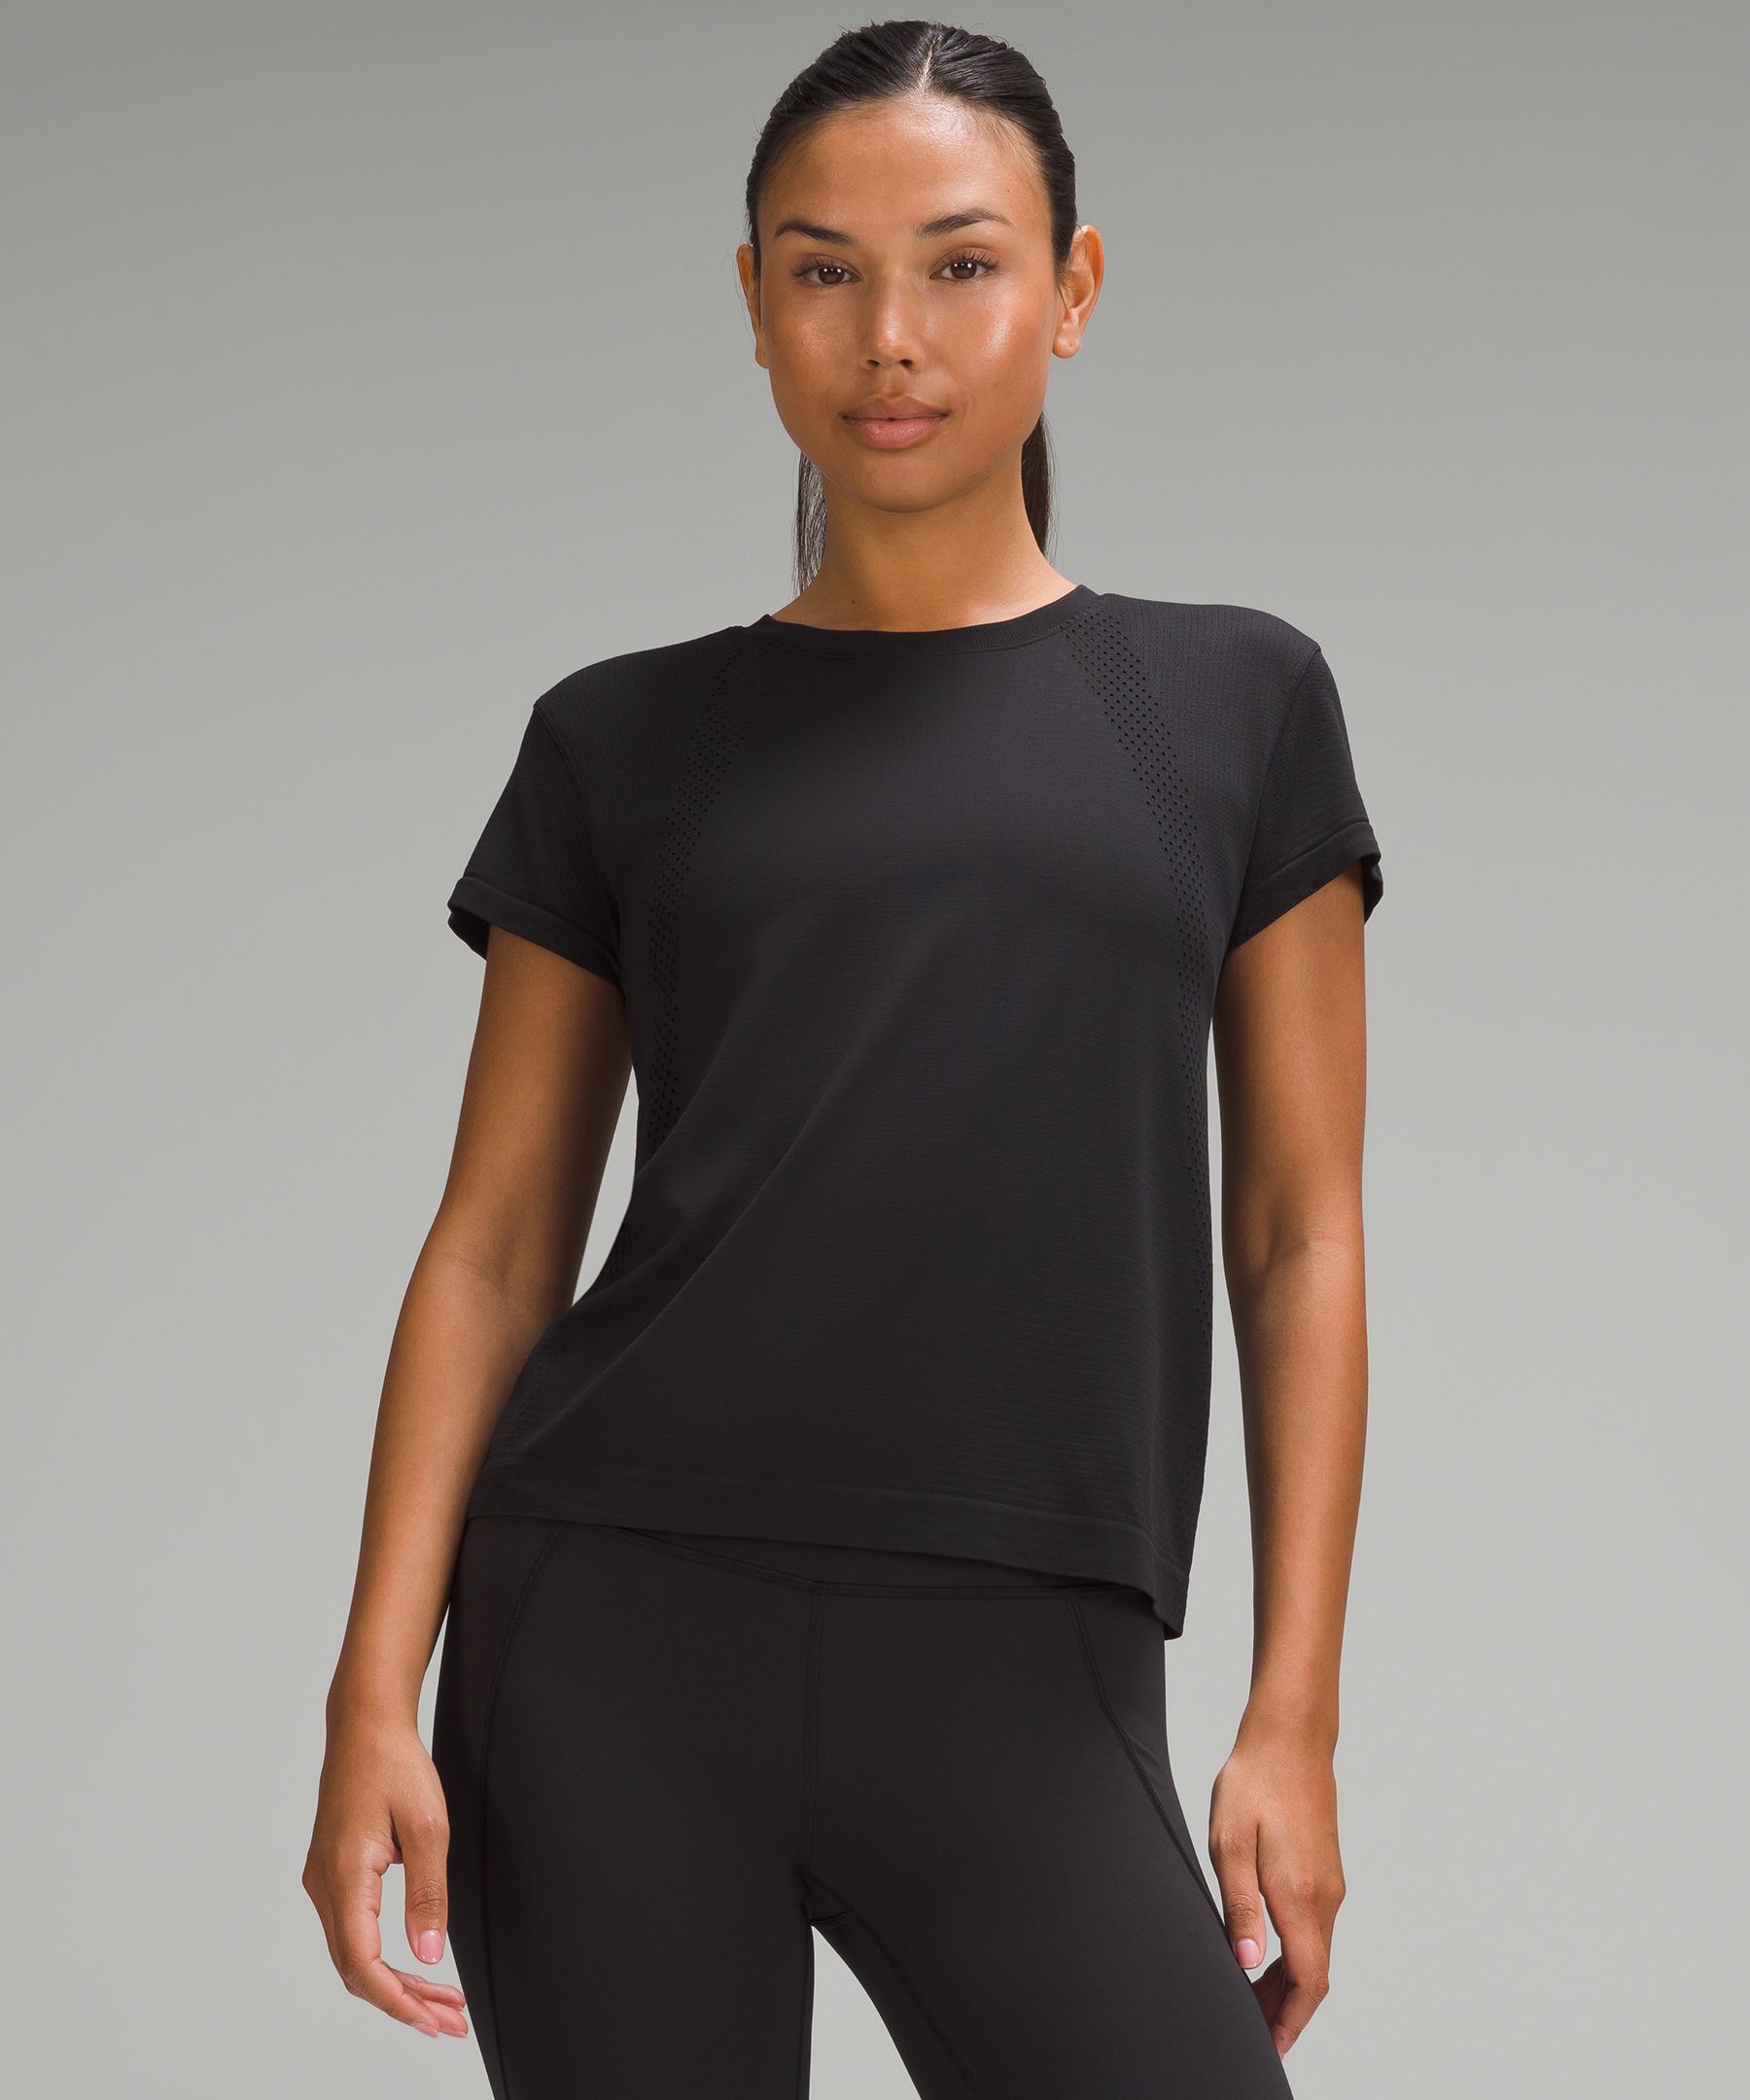 Lululemon Has Just Made Your New Favorite T-Shirt